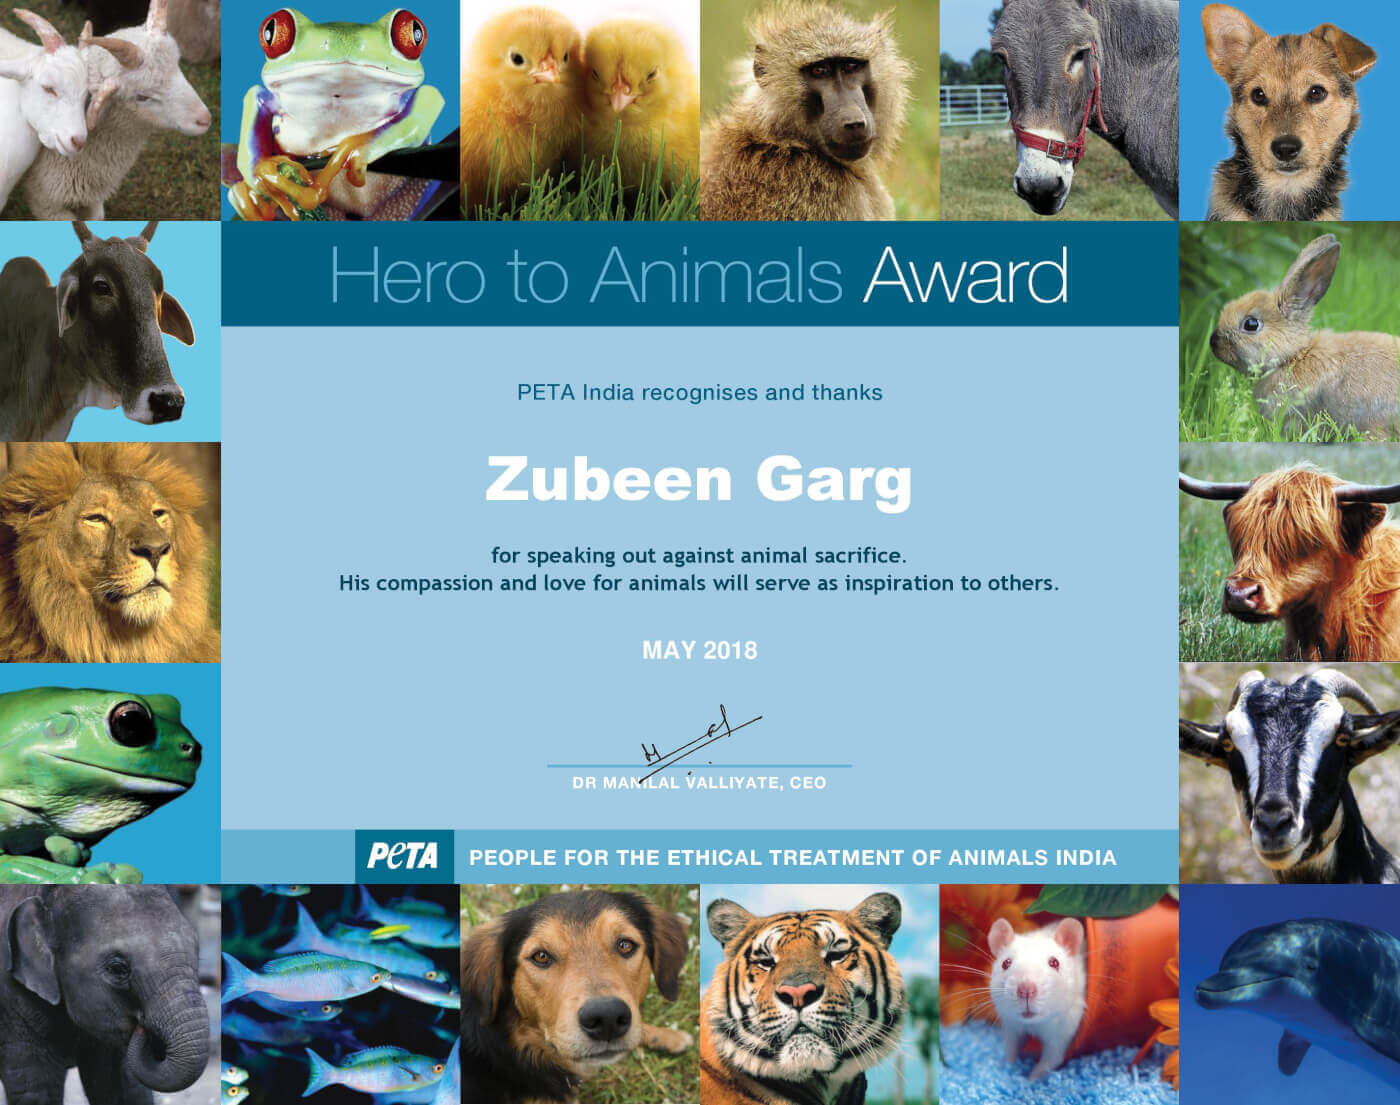 PETA India Honours Zubeen Garg for Speaking Out Against Animal Sacrifice